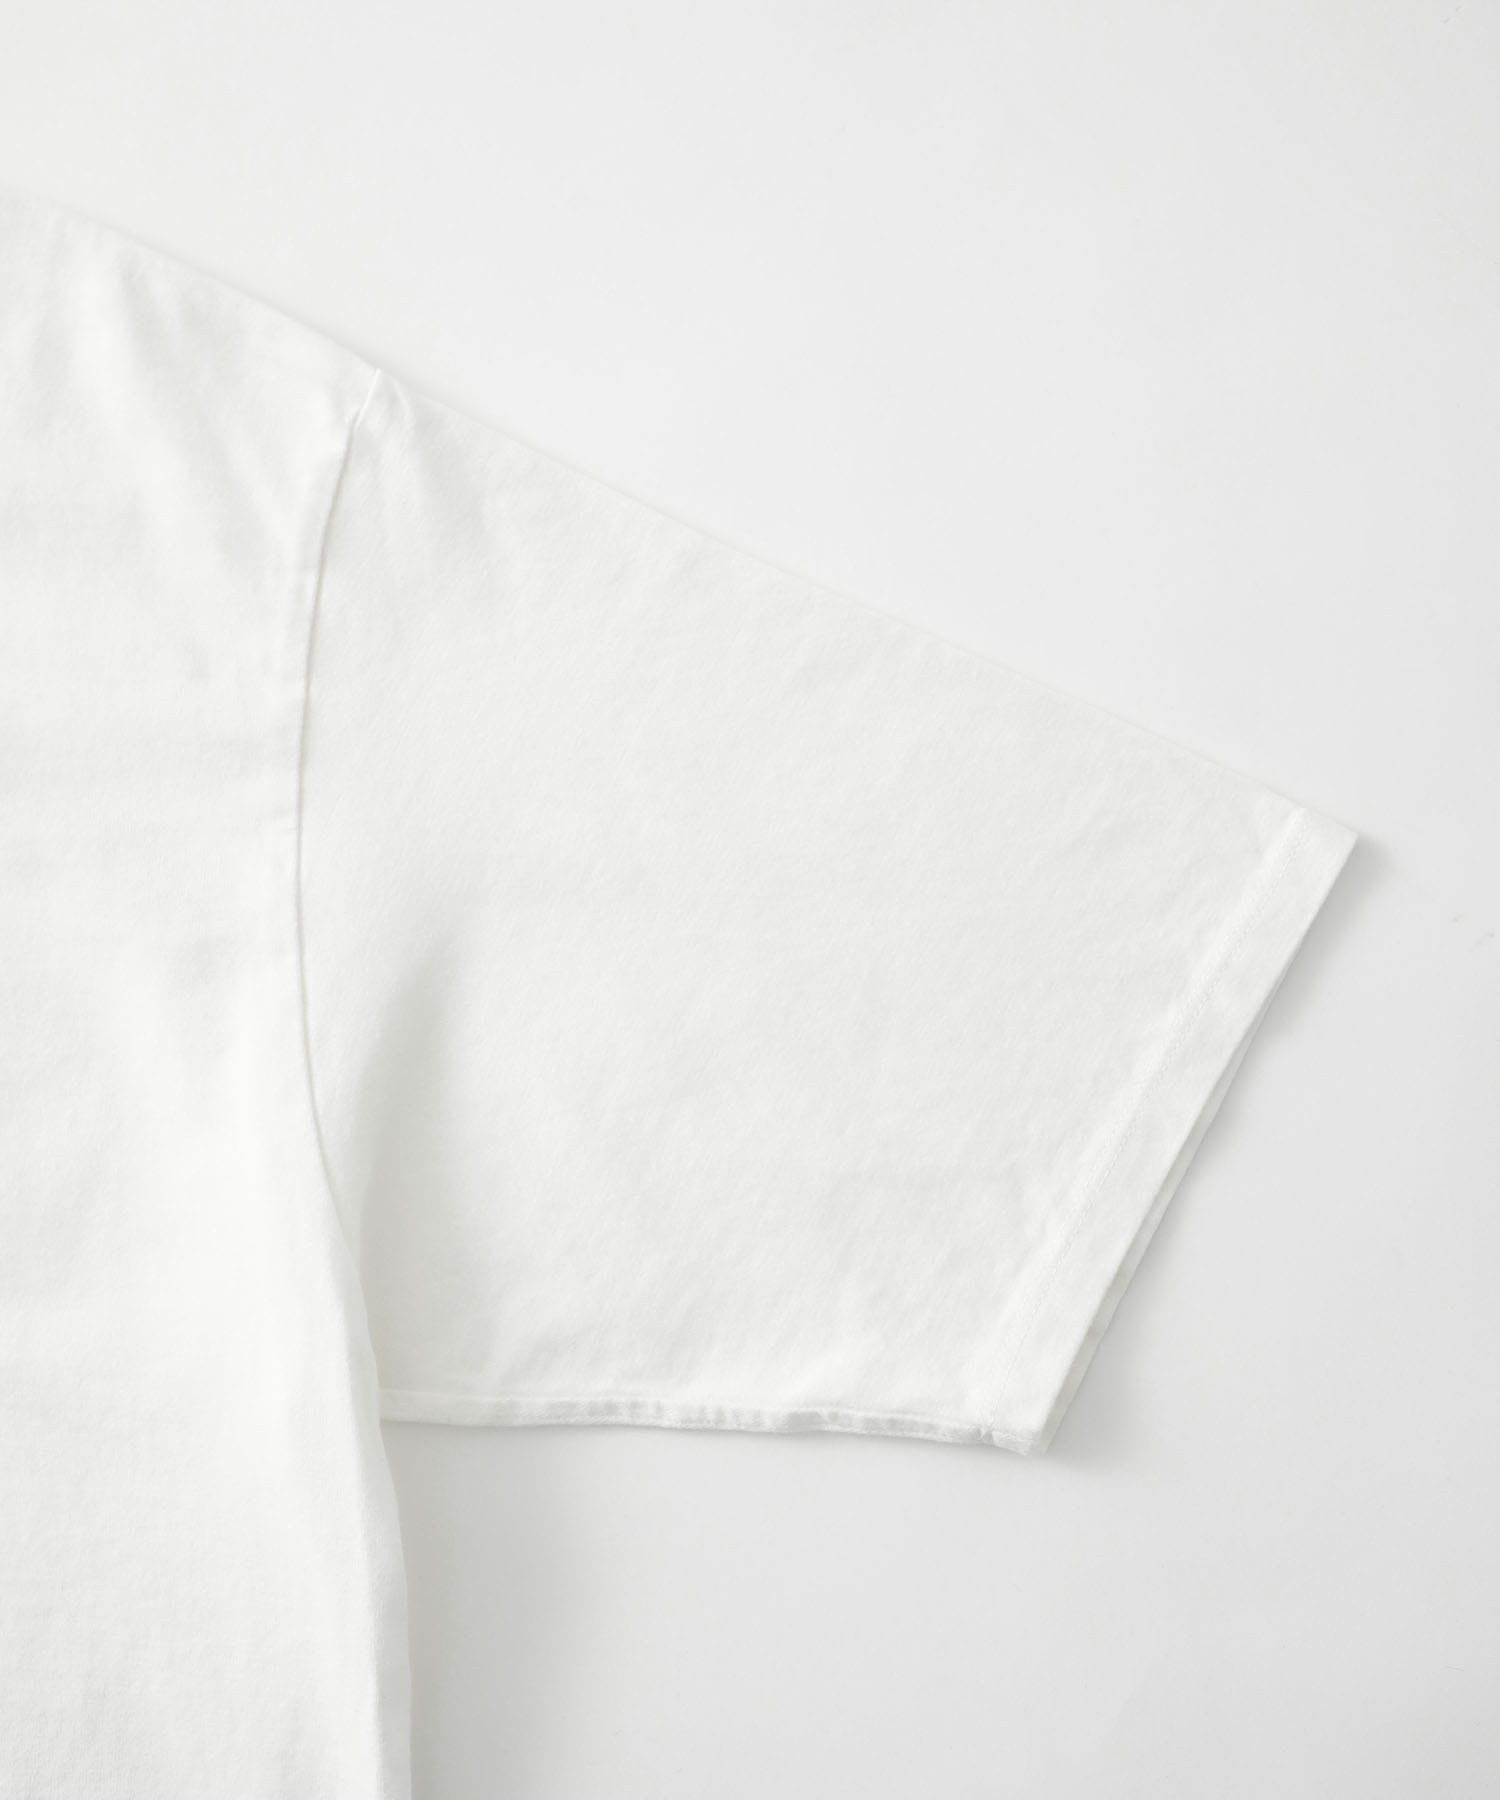 DWELLER S/S TEE 39 by LORD ECHO 